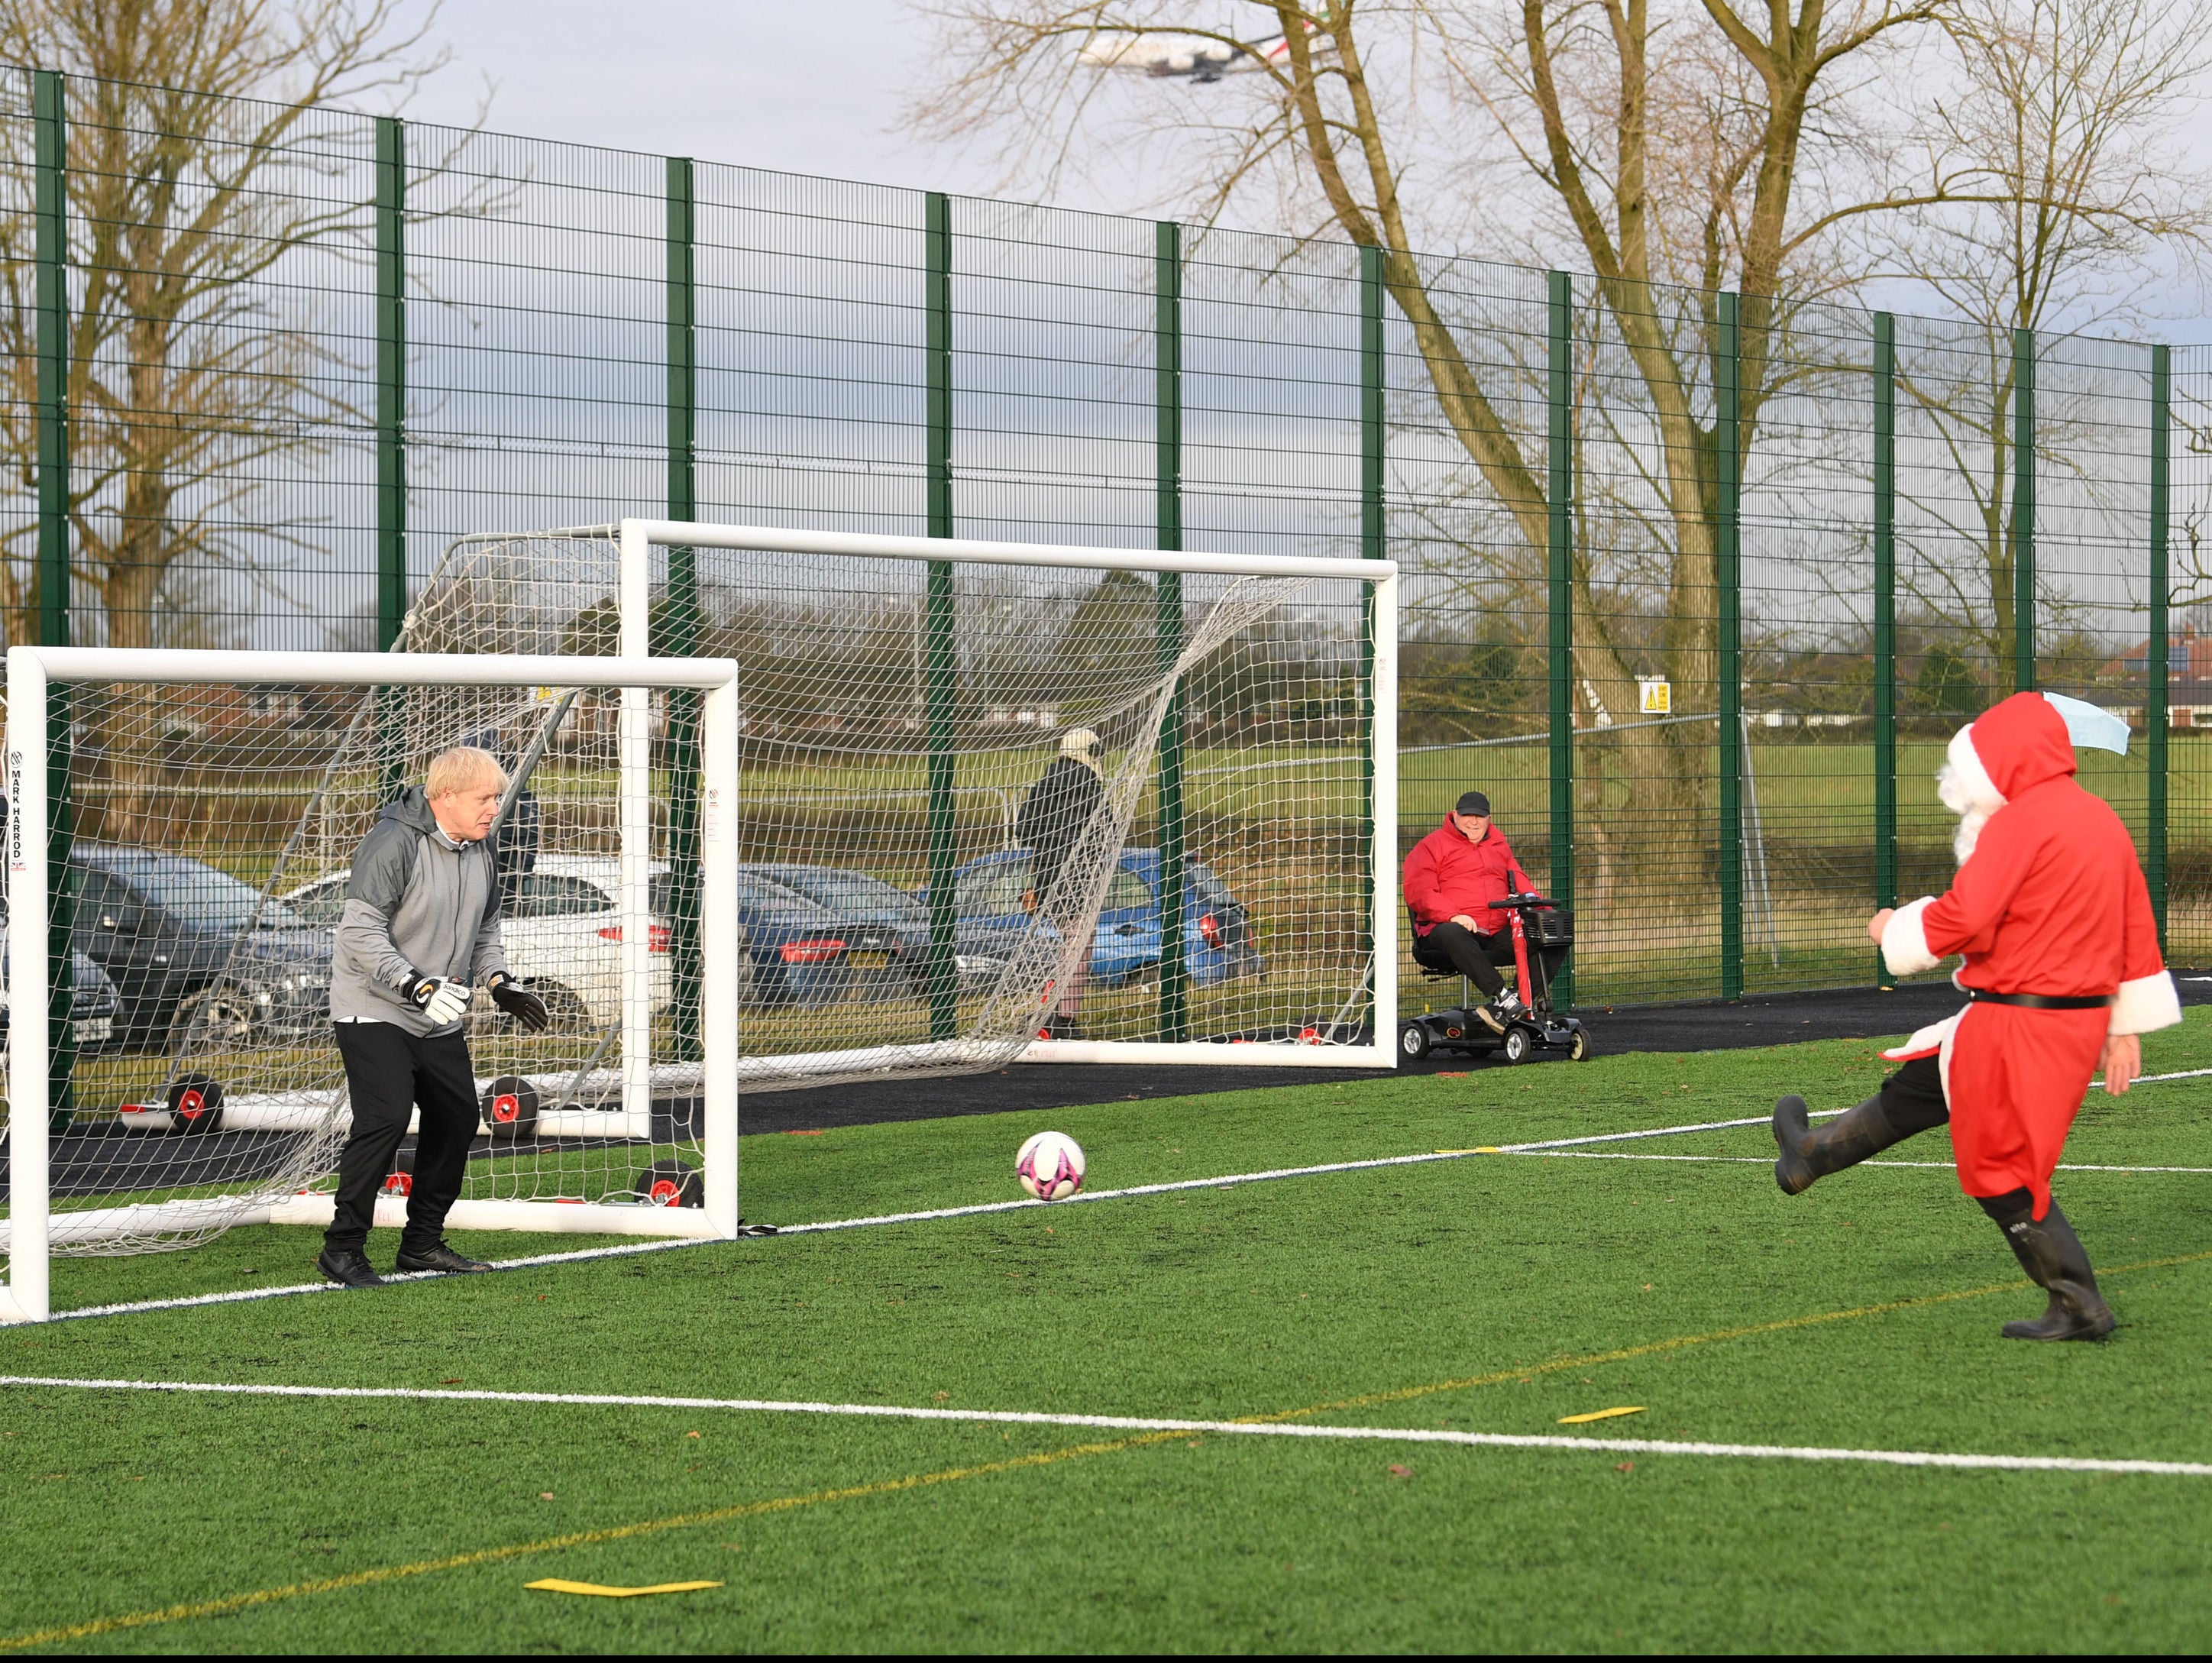 Boris Johnson tries out goalkeeping in Cheshire after pledging £550m investment in grassroots football in December 2019